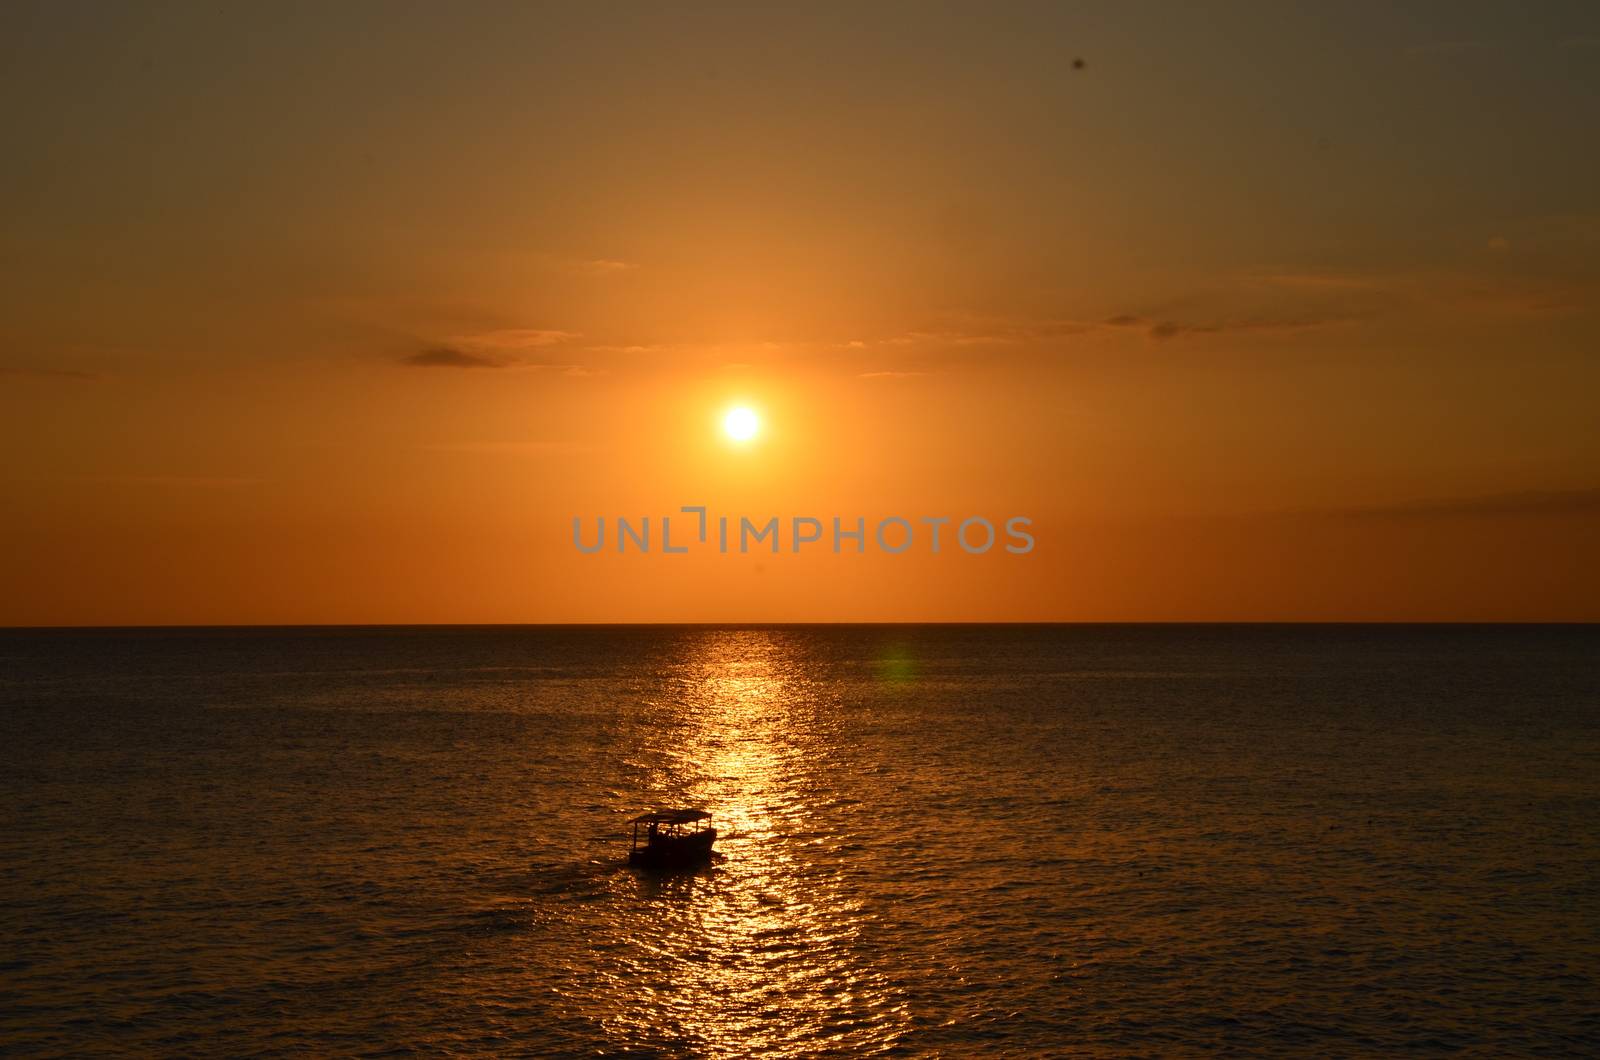 Sunset over the water in Jamaica. A boat is crossing in front of the setting sun.